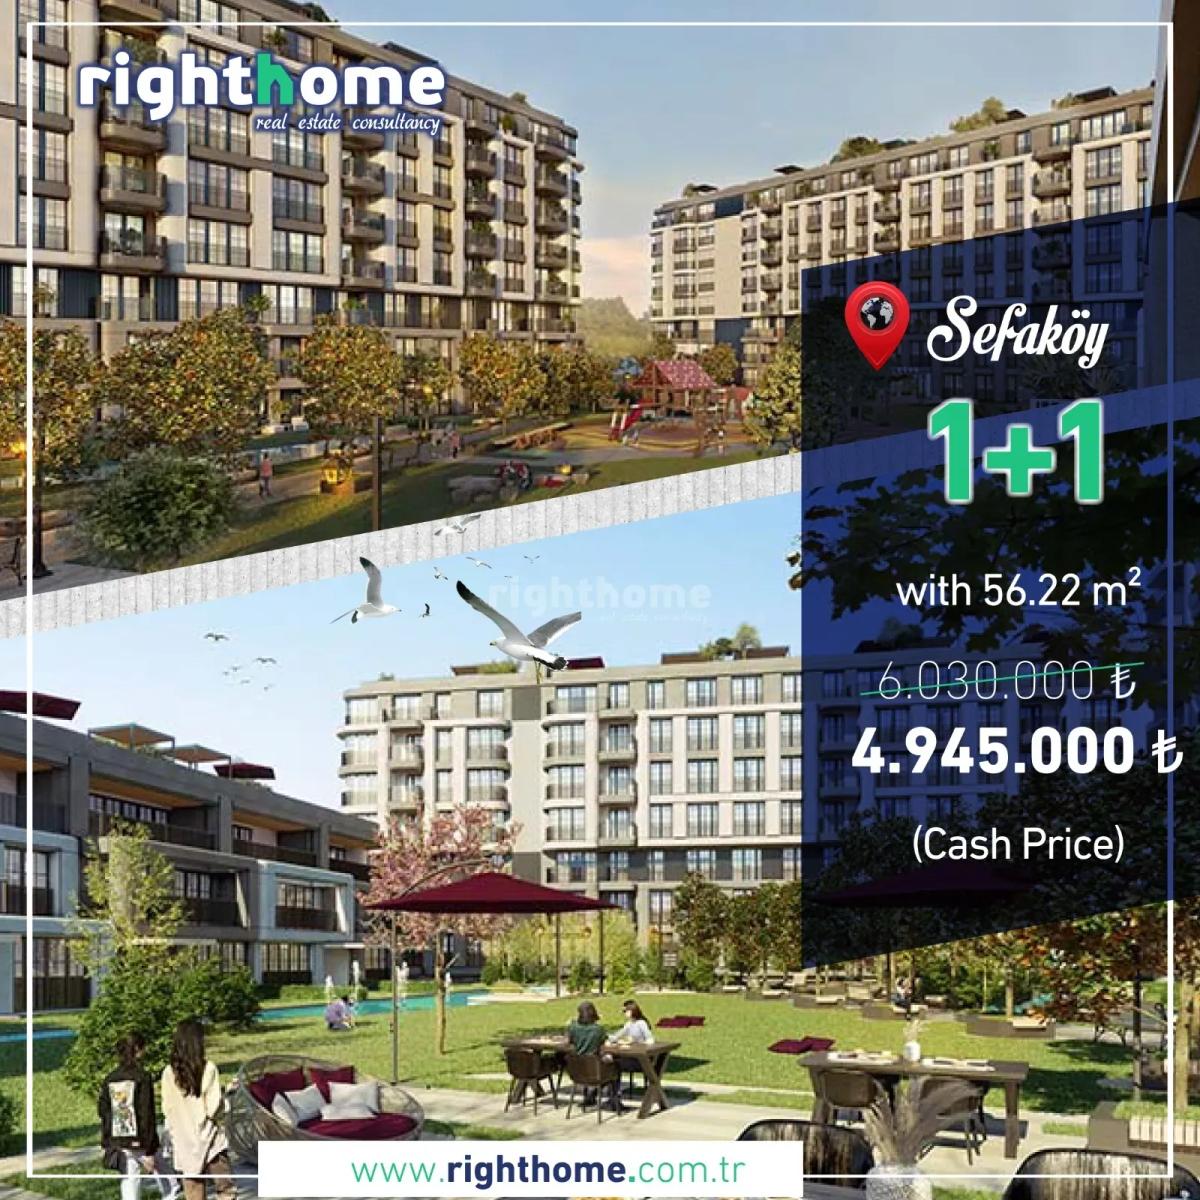 Special offer for an apartment in Sefakoy area in the heart of the city